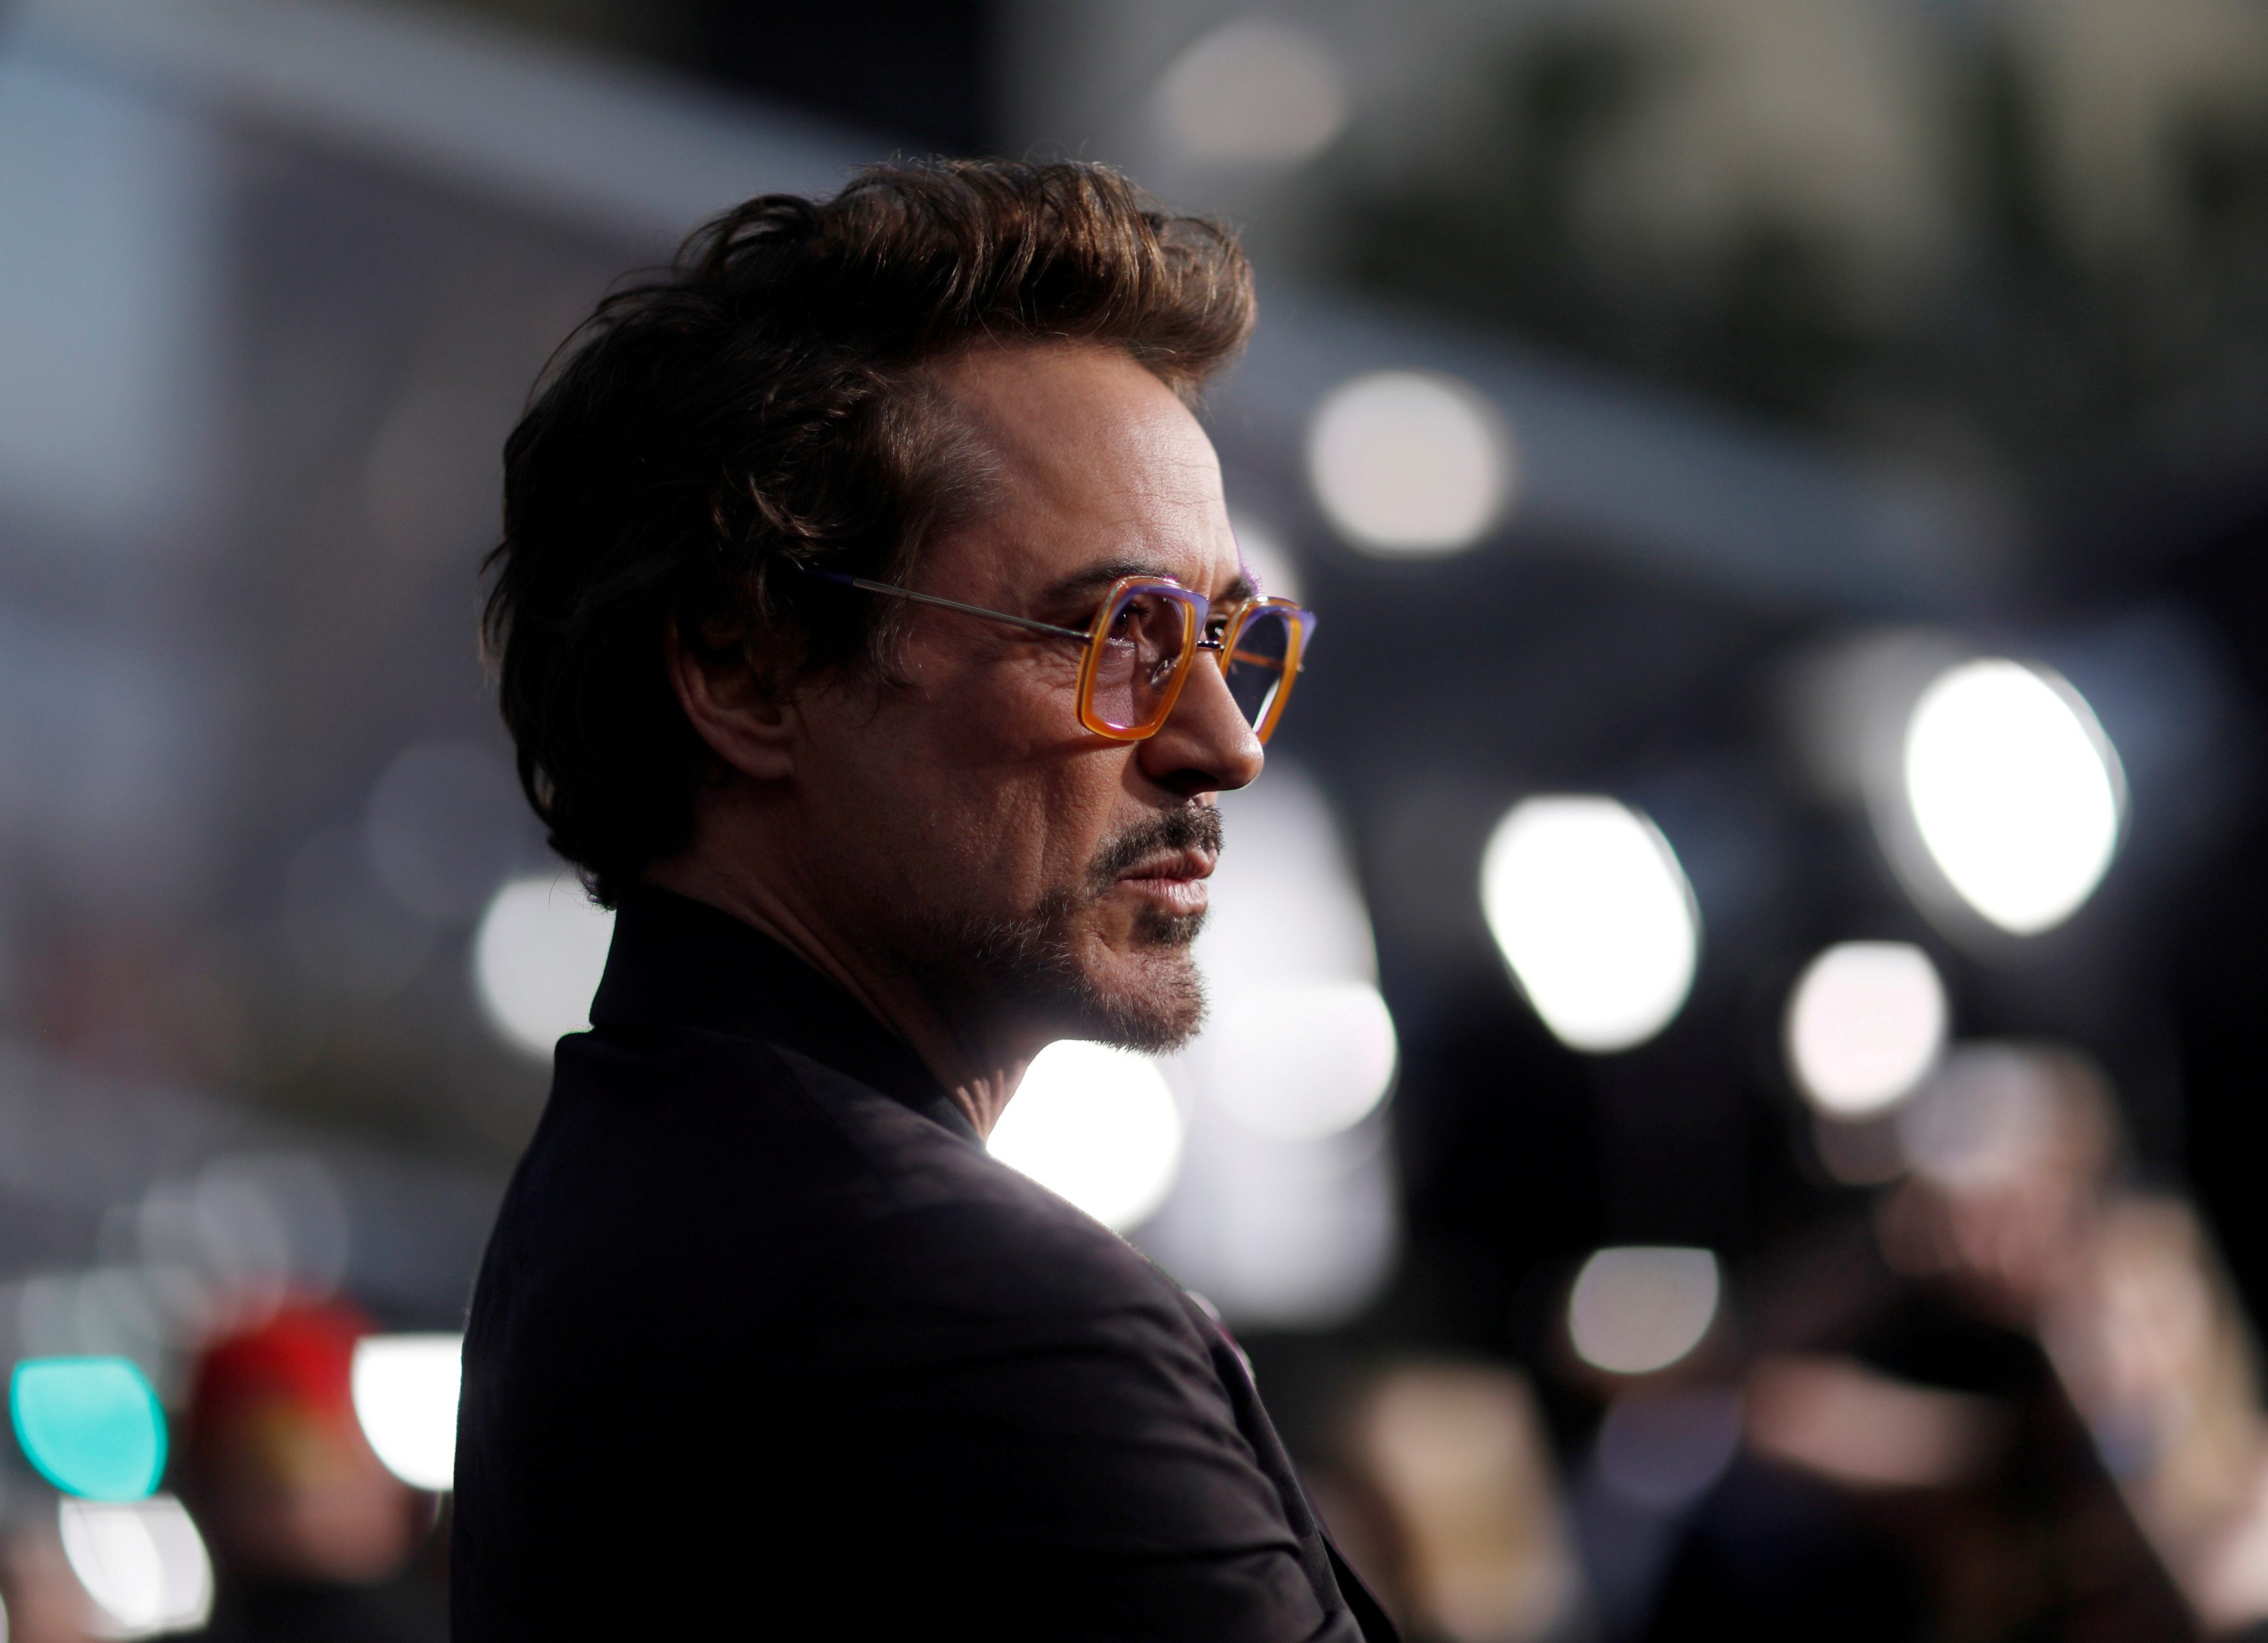 'Iron Man' star Robert Downey Jr. launches funds in environmental fight